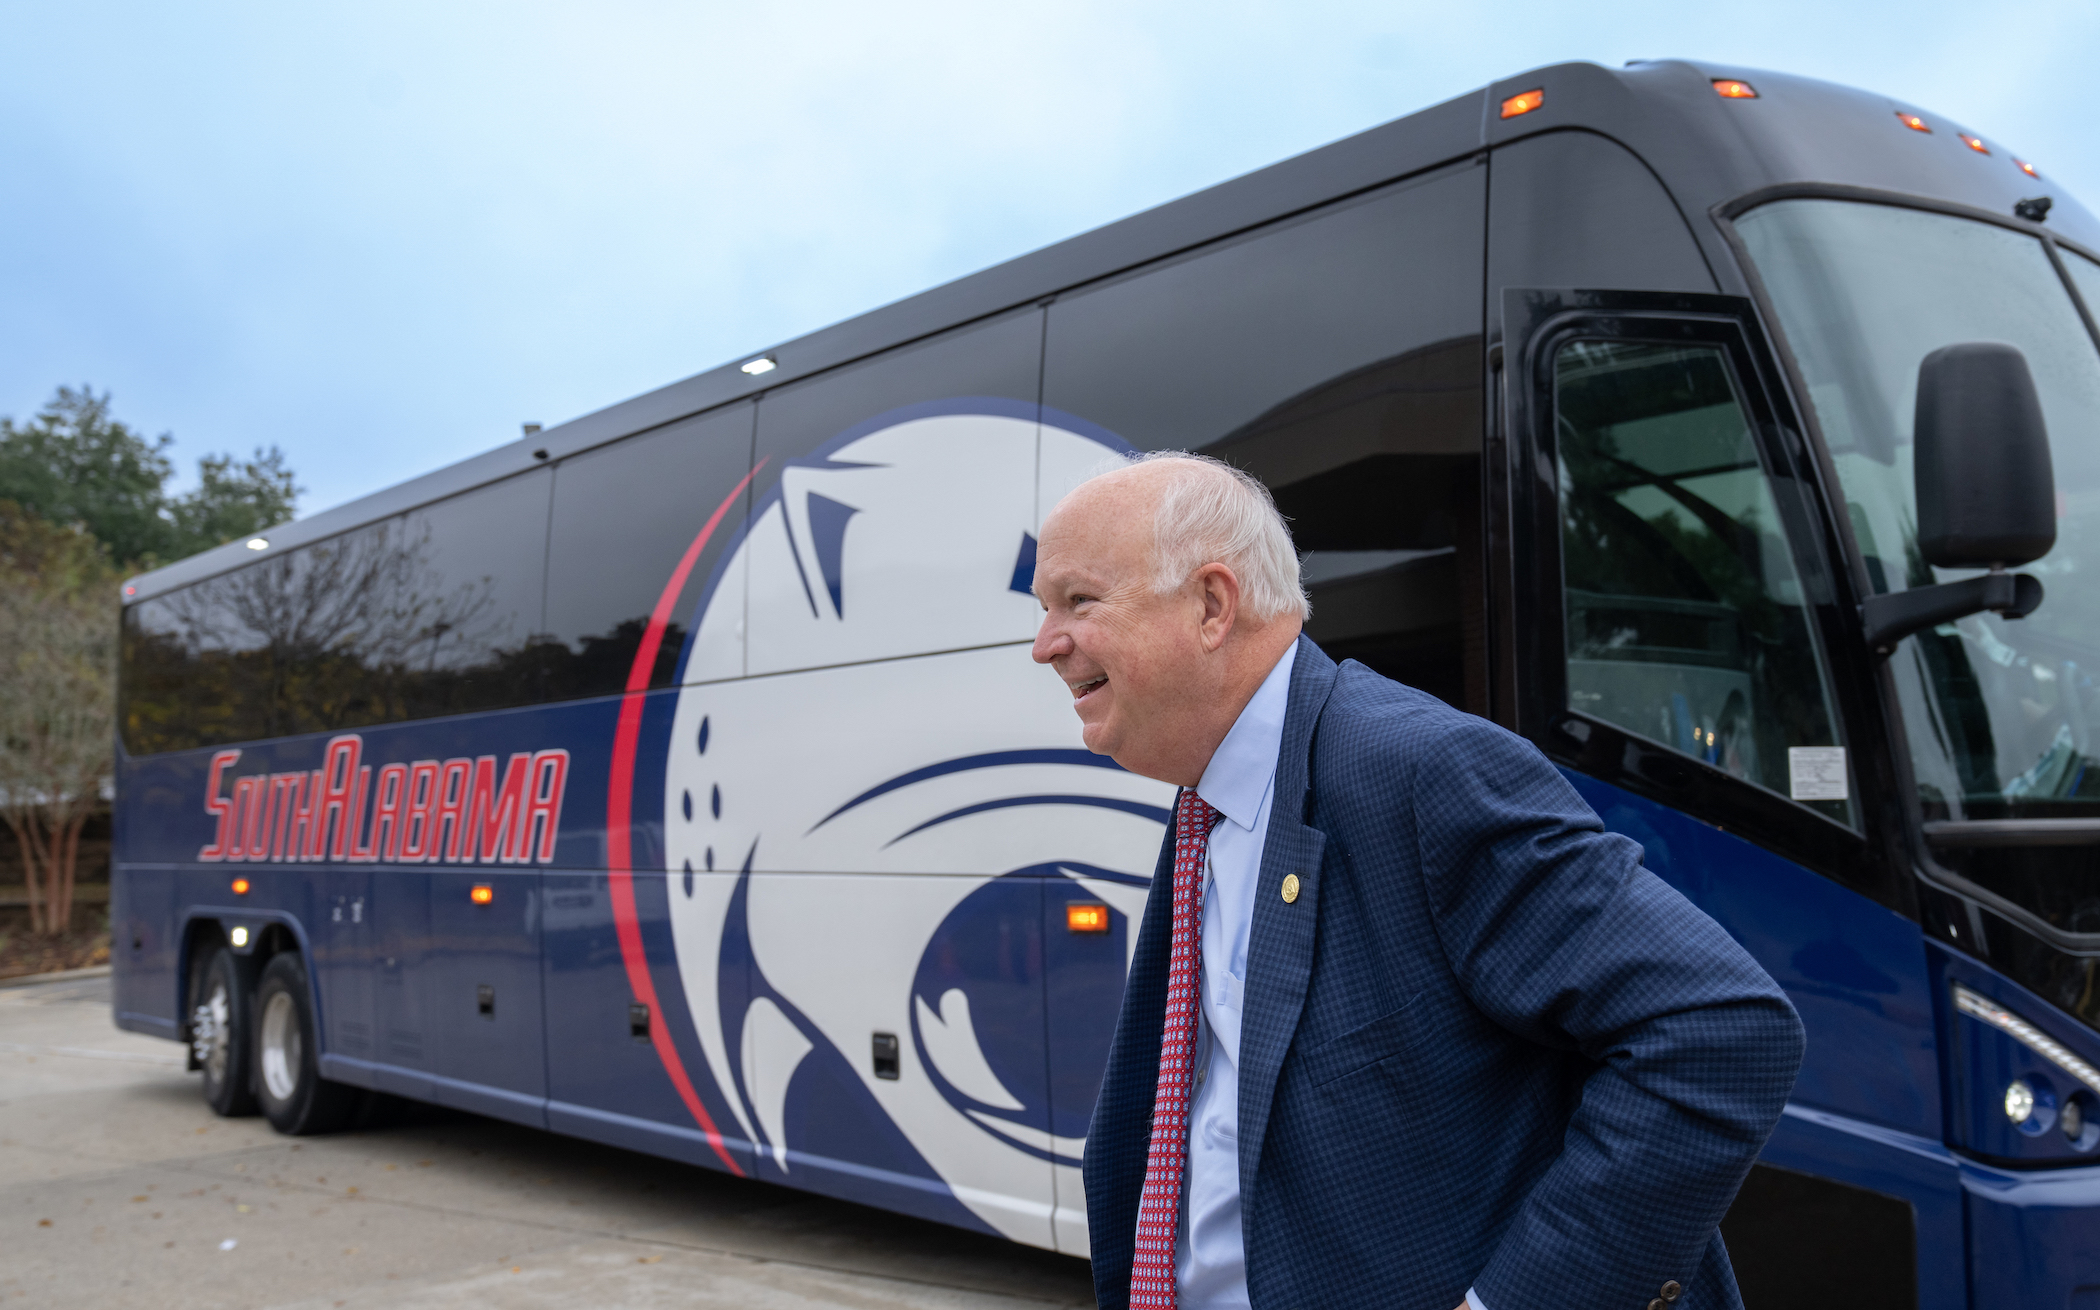 A smiling president Jo Bonner standing in front of a coach bus that says South Alabama.